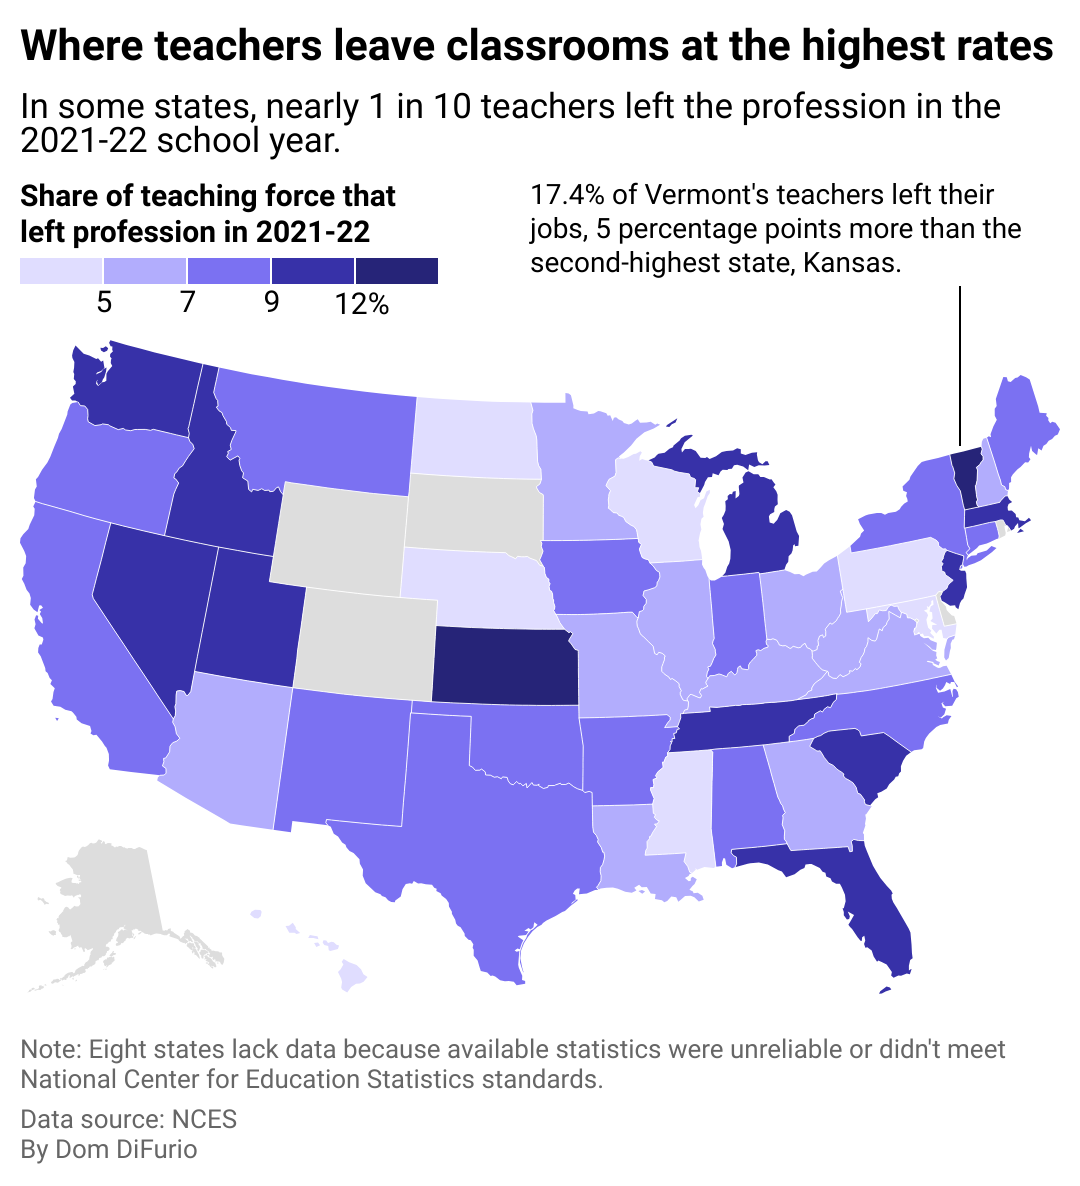 A map of the U.S. showing the percentage of teachers who left the profession in all but eight states that lack data on teacher attrition. States including Vermont, an outlier, Florida, South Carolina, Tennessee, Kansas, New Jersey, and Michigan saw the highest rates of teacher attrition in the 2021-22 school year.